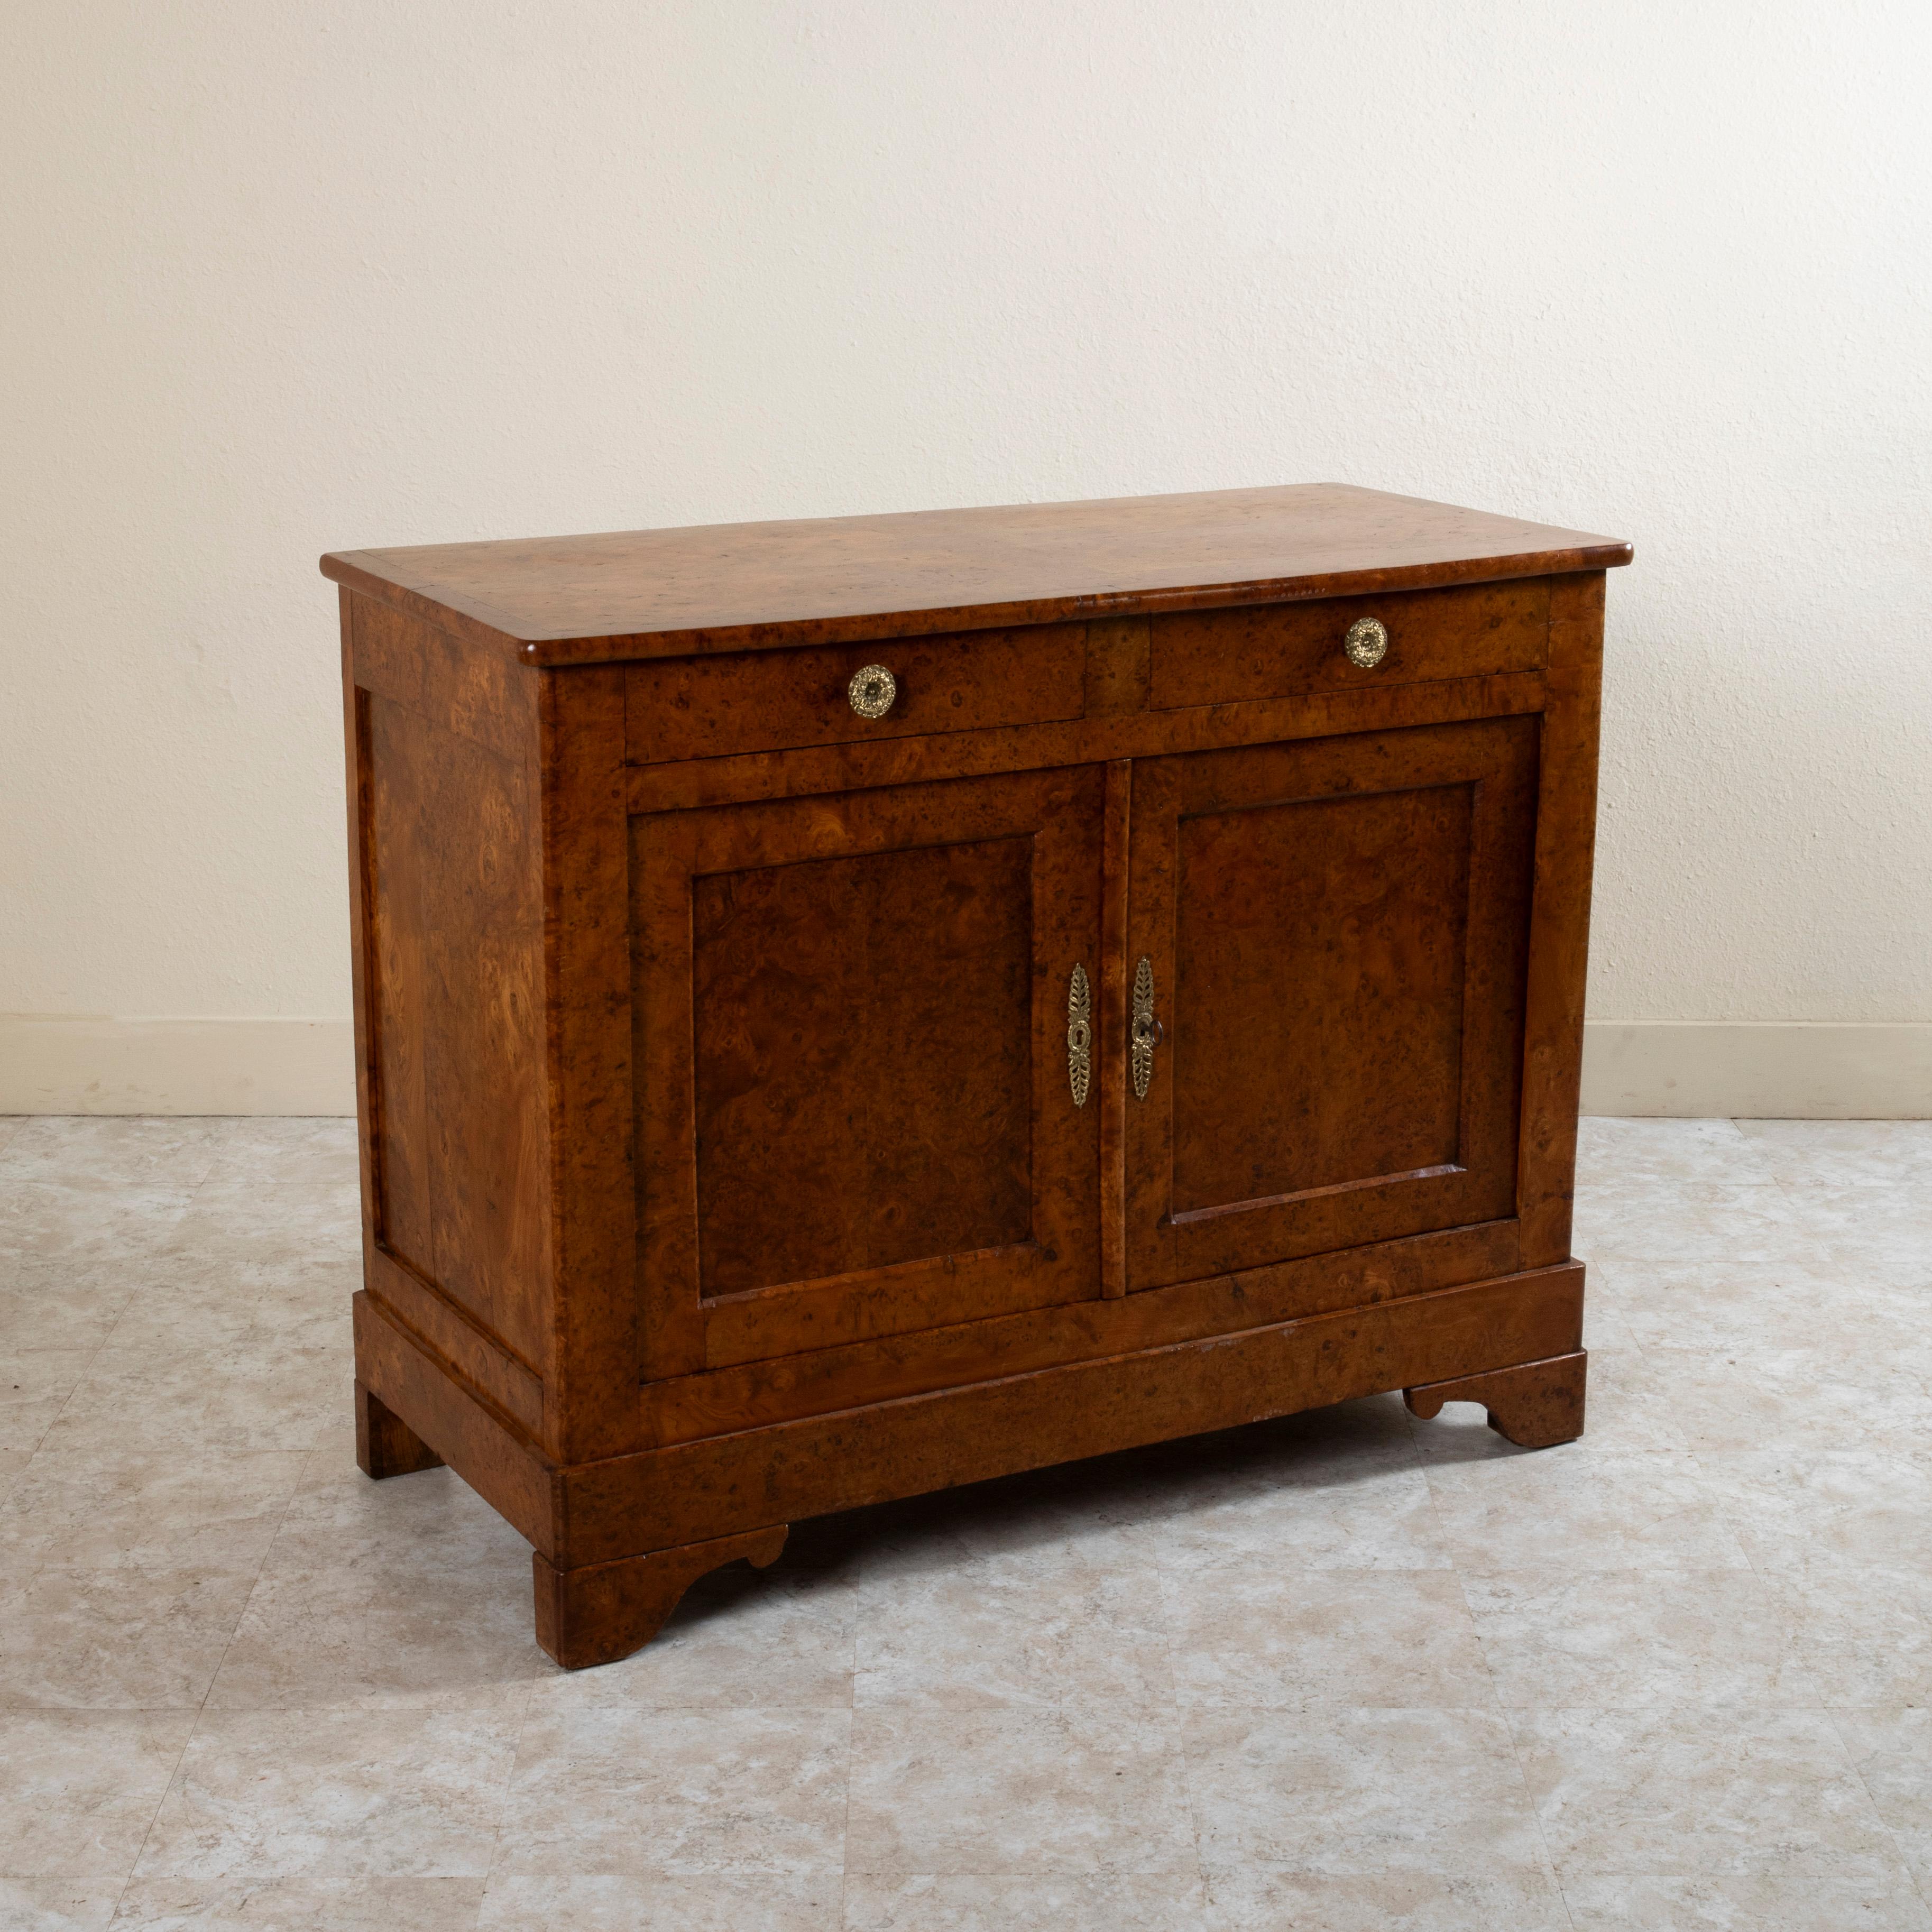 Gilt Mid-19th Century French Louis Philippe Period Burl Elm Buffet or Sideboard For Sale